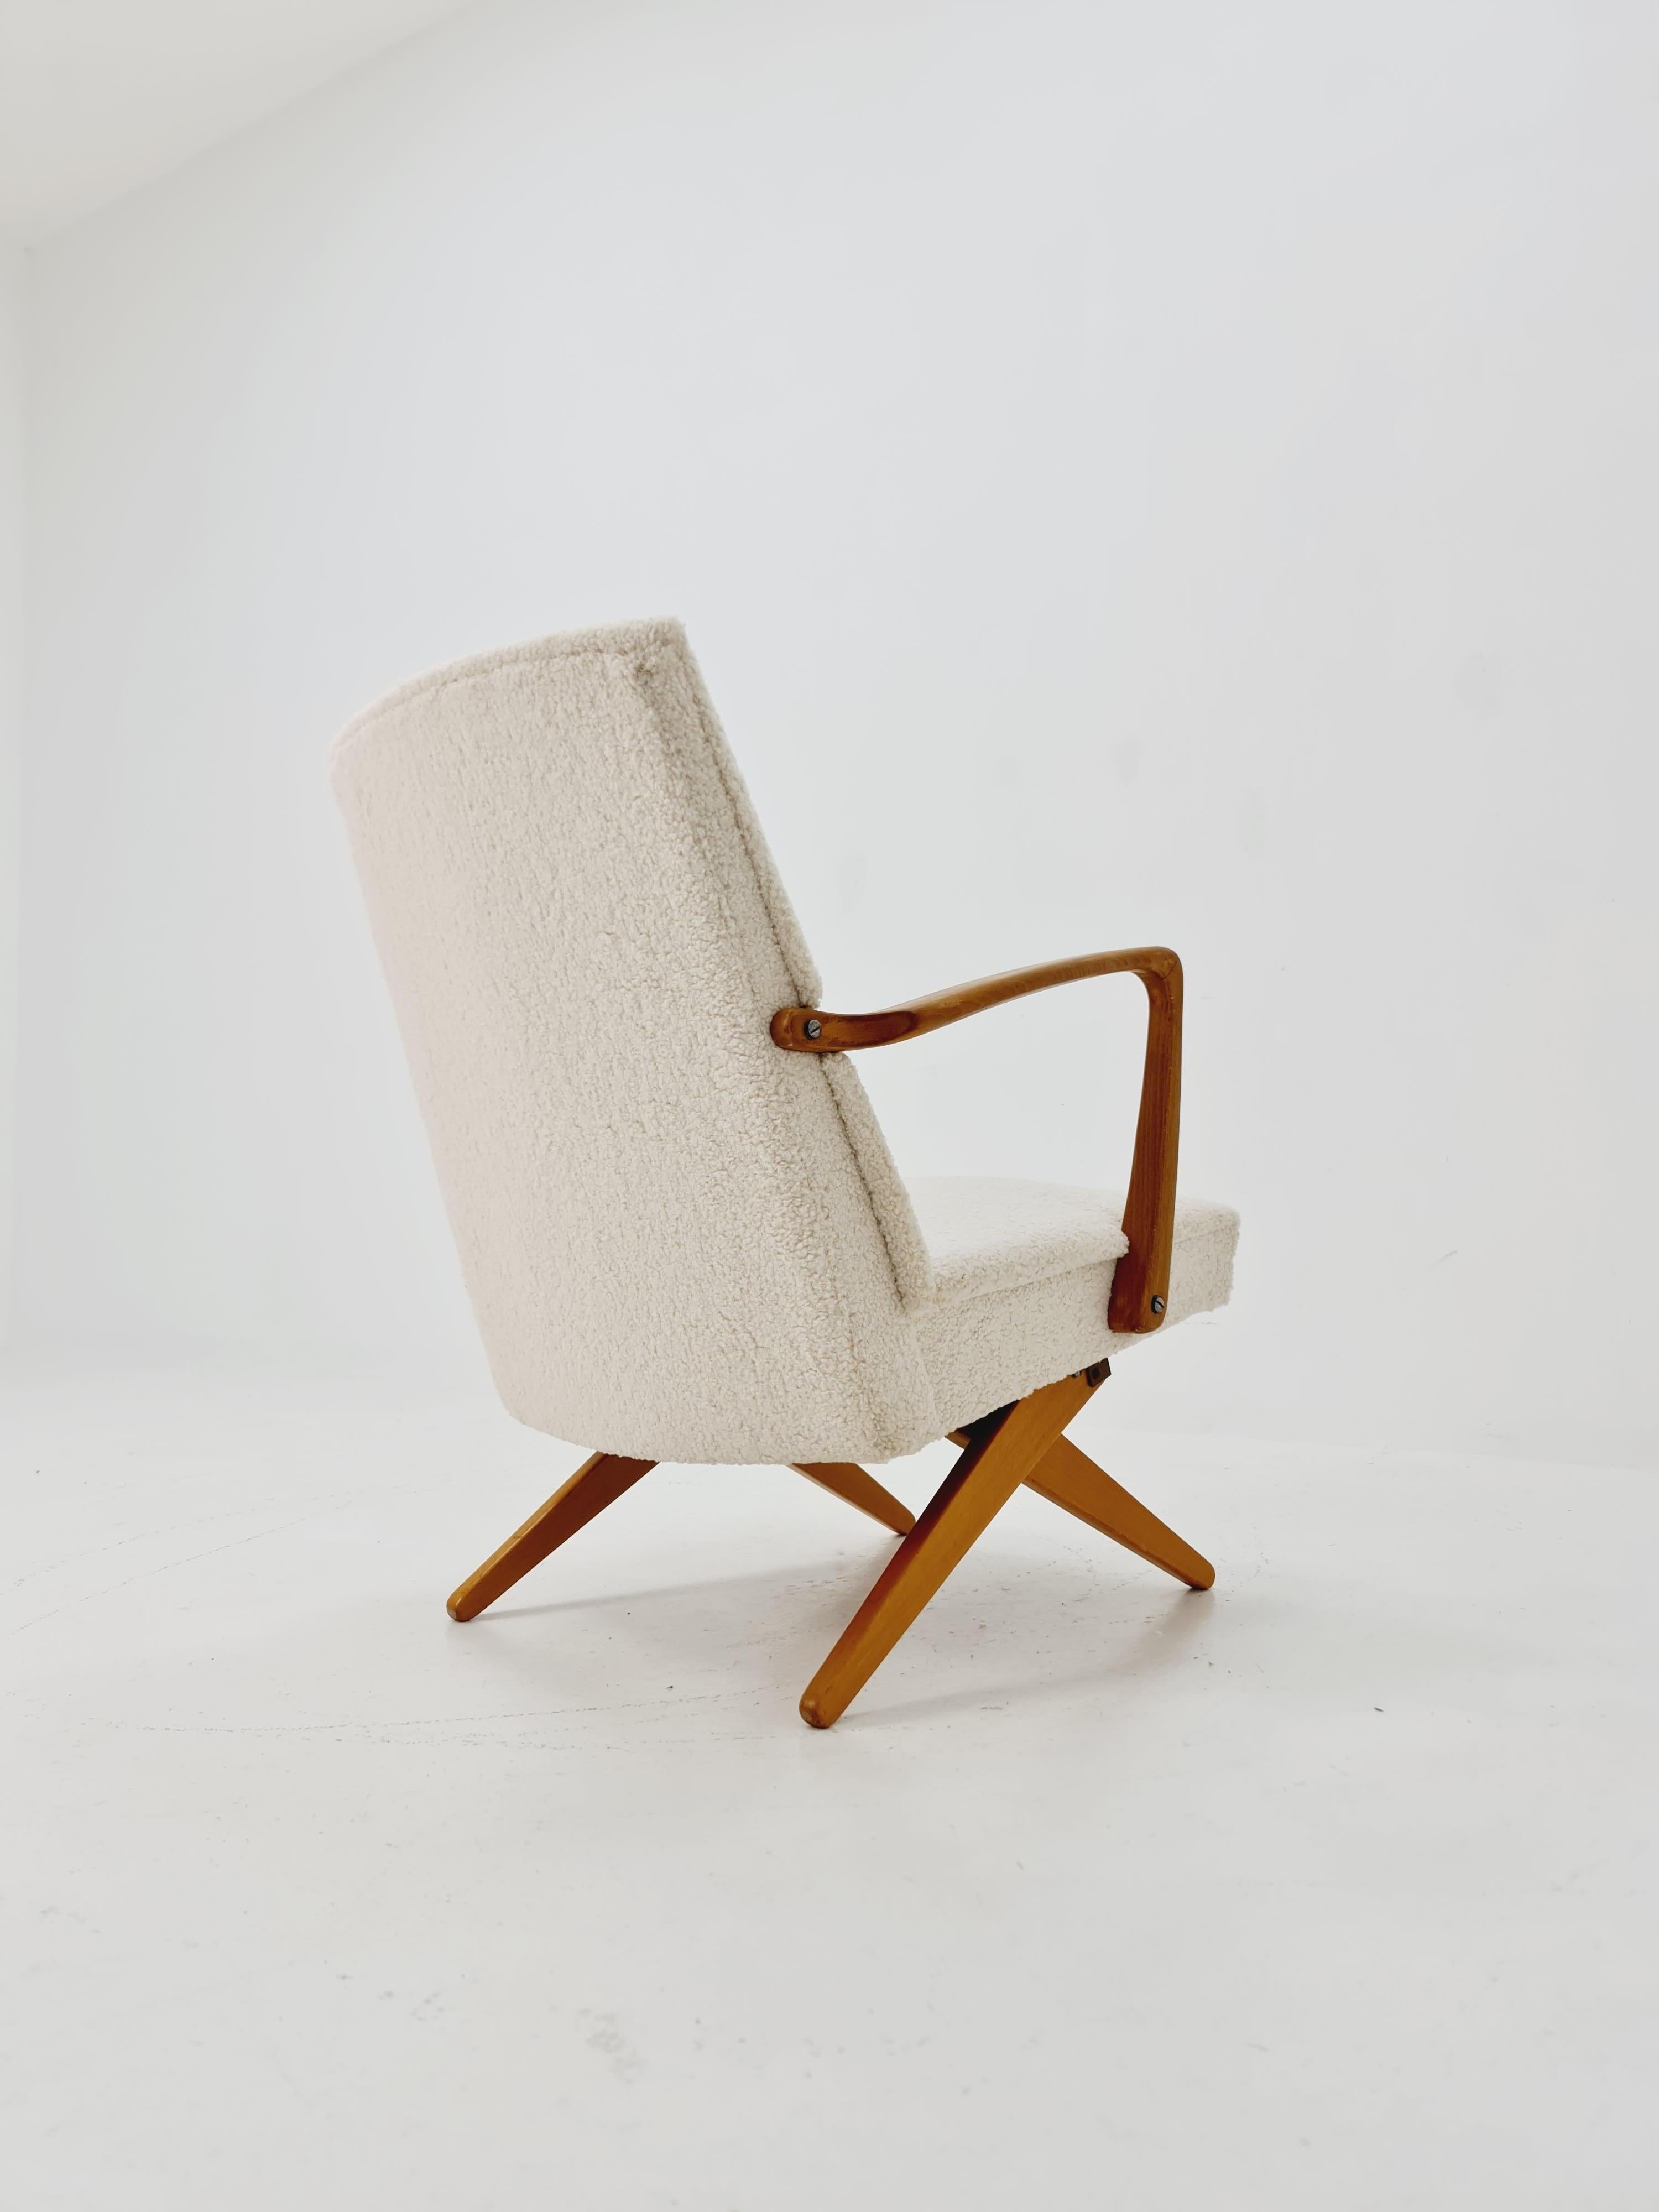 Vintage Midcentury German  Teddy fabric Scissor  Armchair by Wilhelm Knoll  1950s

The chair frame are made from solid wood , in good vintage condition, however, as with all vintage items some minor wear marks should be expected.

Designer /